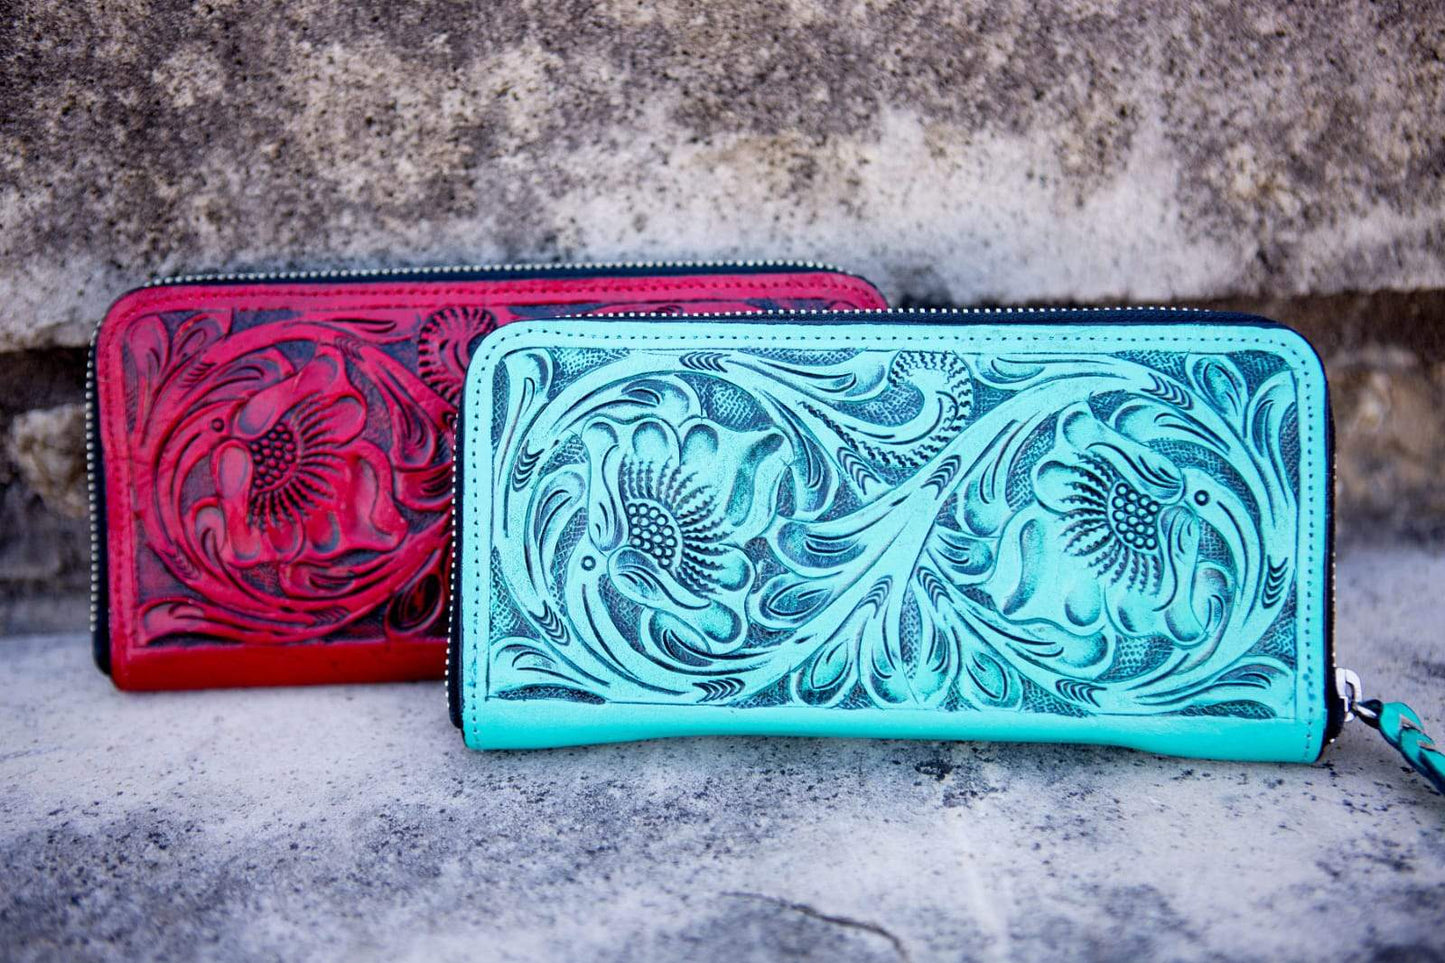 Tooled Leather Accordian Wallet - bag, clutch, cowgirl, floral, floralleather, leather, made in the usa, madeintheusa, MADEINUSA, madeinusajewelry, Printed in USA, purse, southwestern, tooled, tooledleather, turquoise, usa, usa artisan, usa artist, usa made, usaartisan, usaartist, USAMADE, usamadejewelry, usaratisan, usartisan, wallet, western -  - Baha Ranch Western Wear